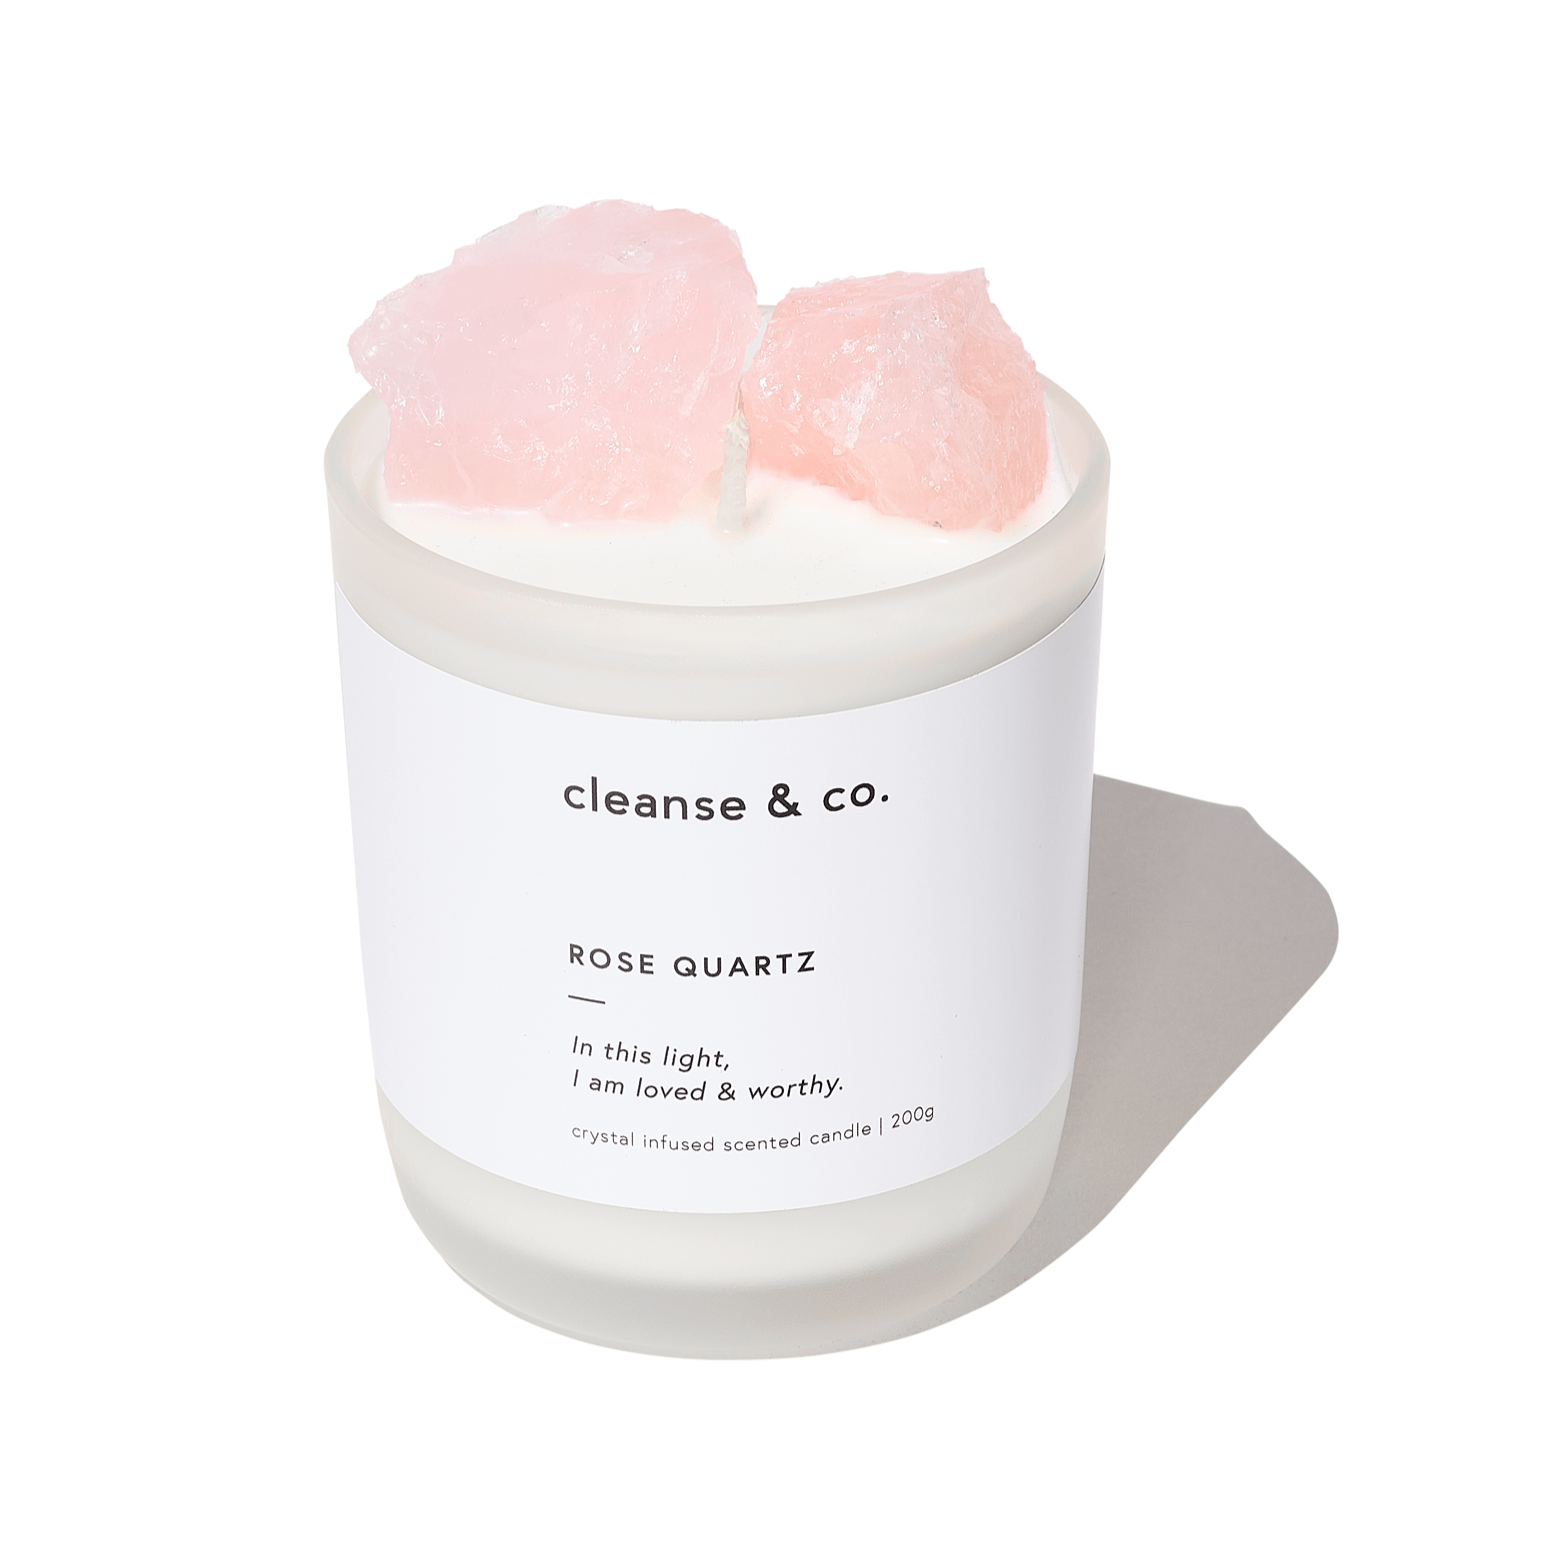 rose quartz crystal candle 200g by Cleanse & co